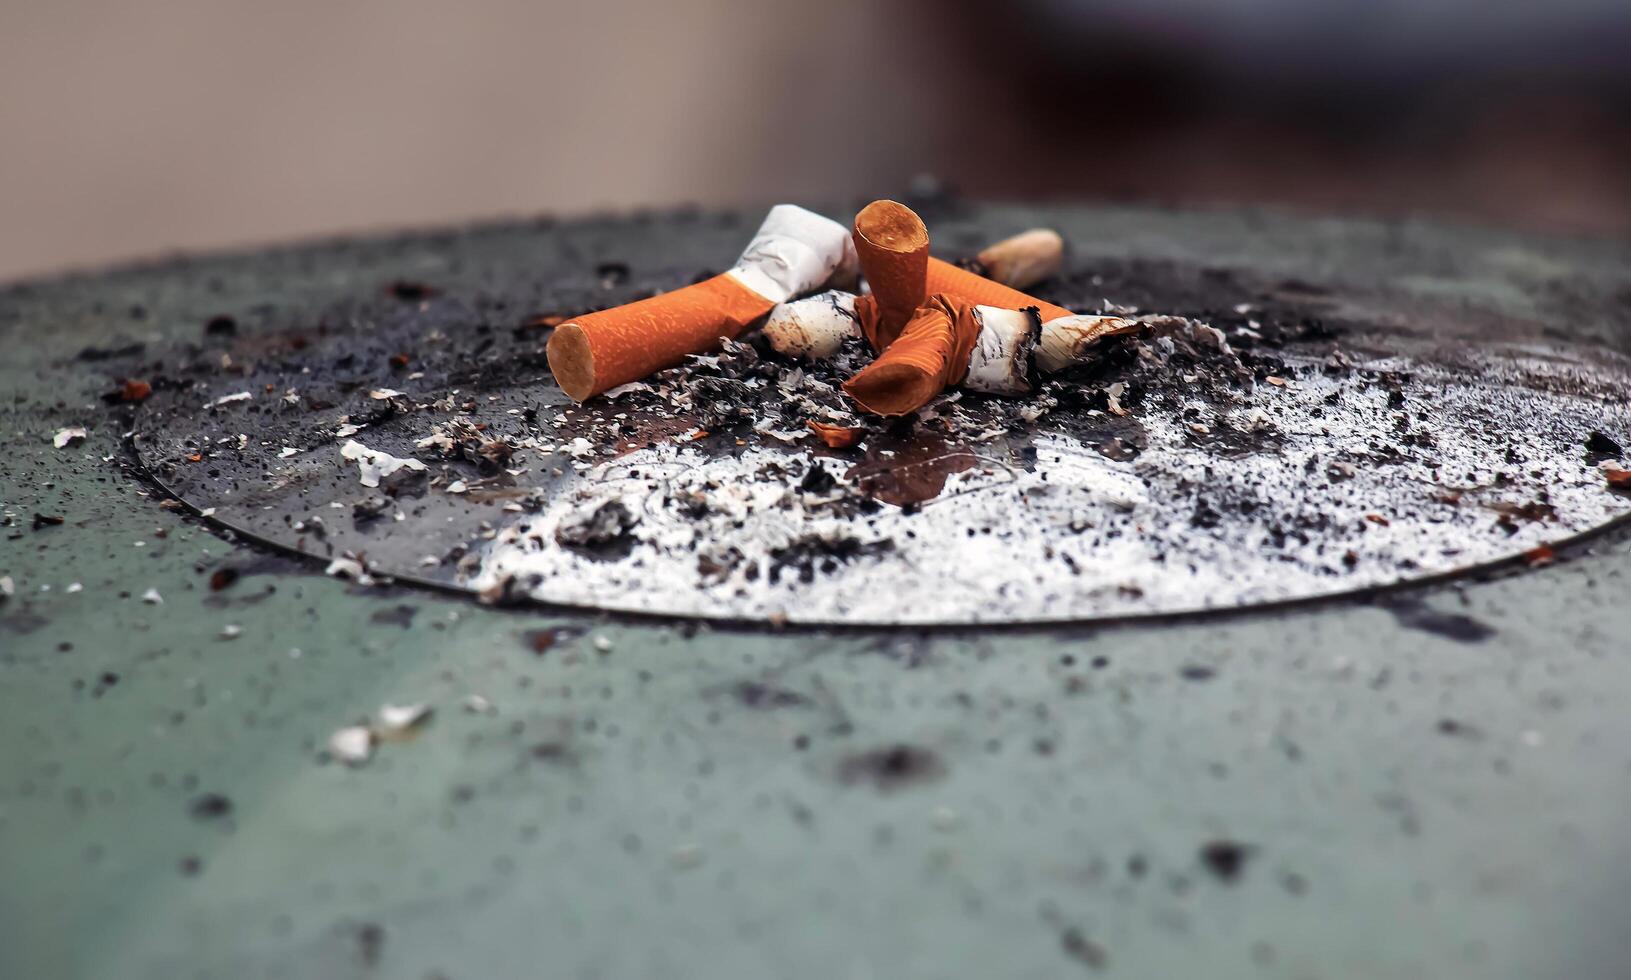 Ashtray with cigarette butts and ashes. Anti-smoking concept. photo